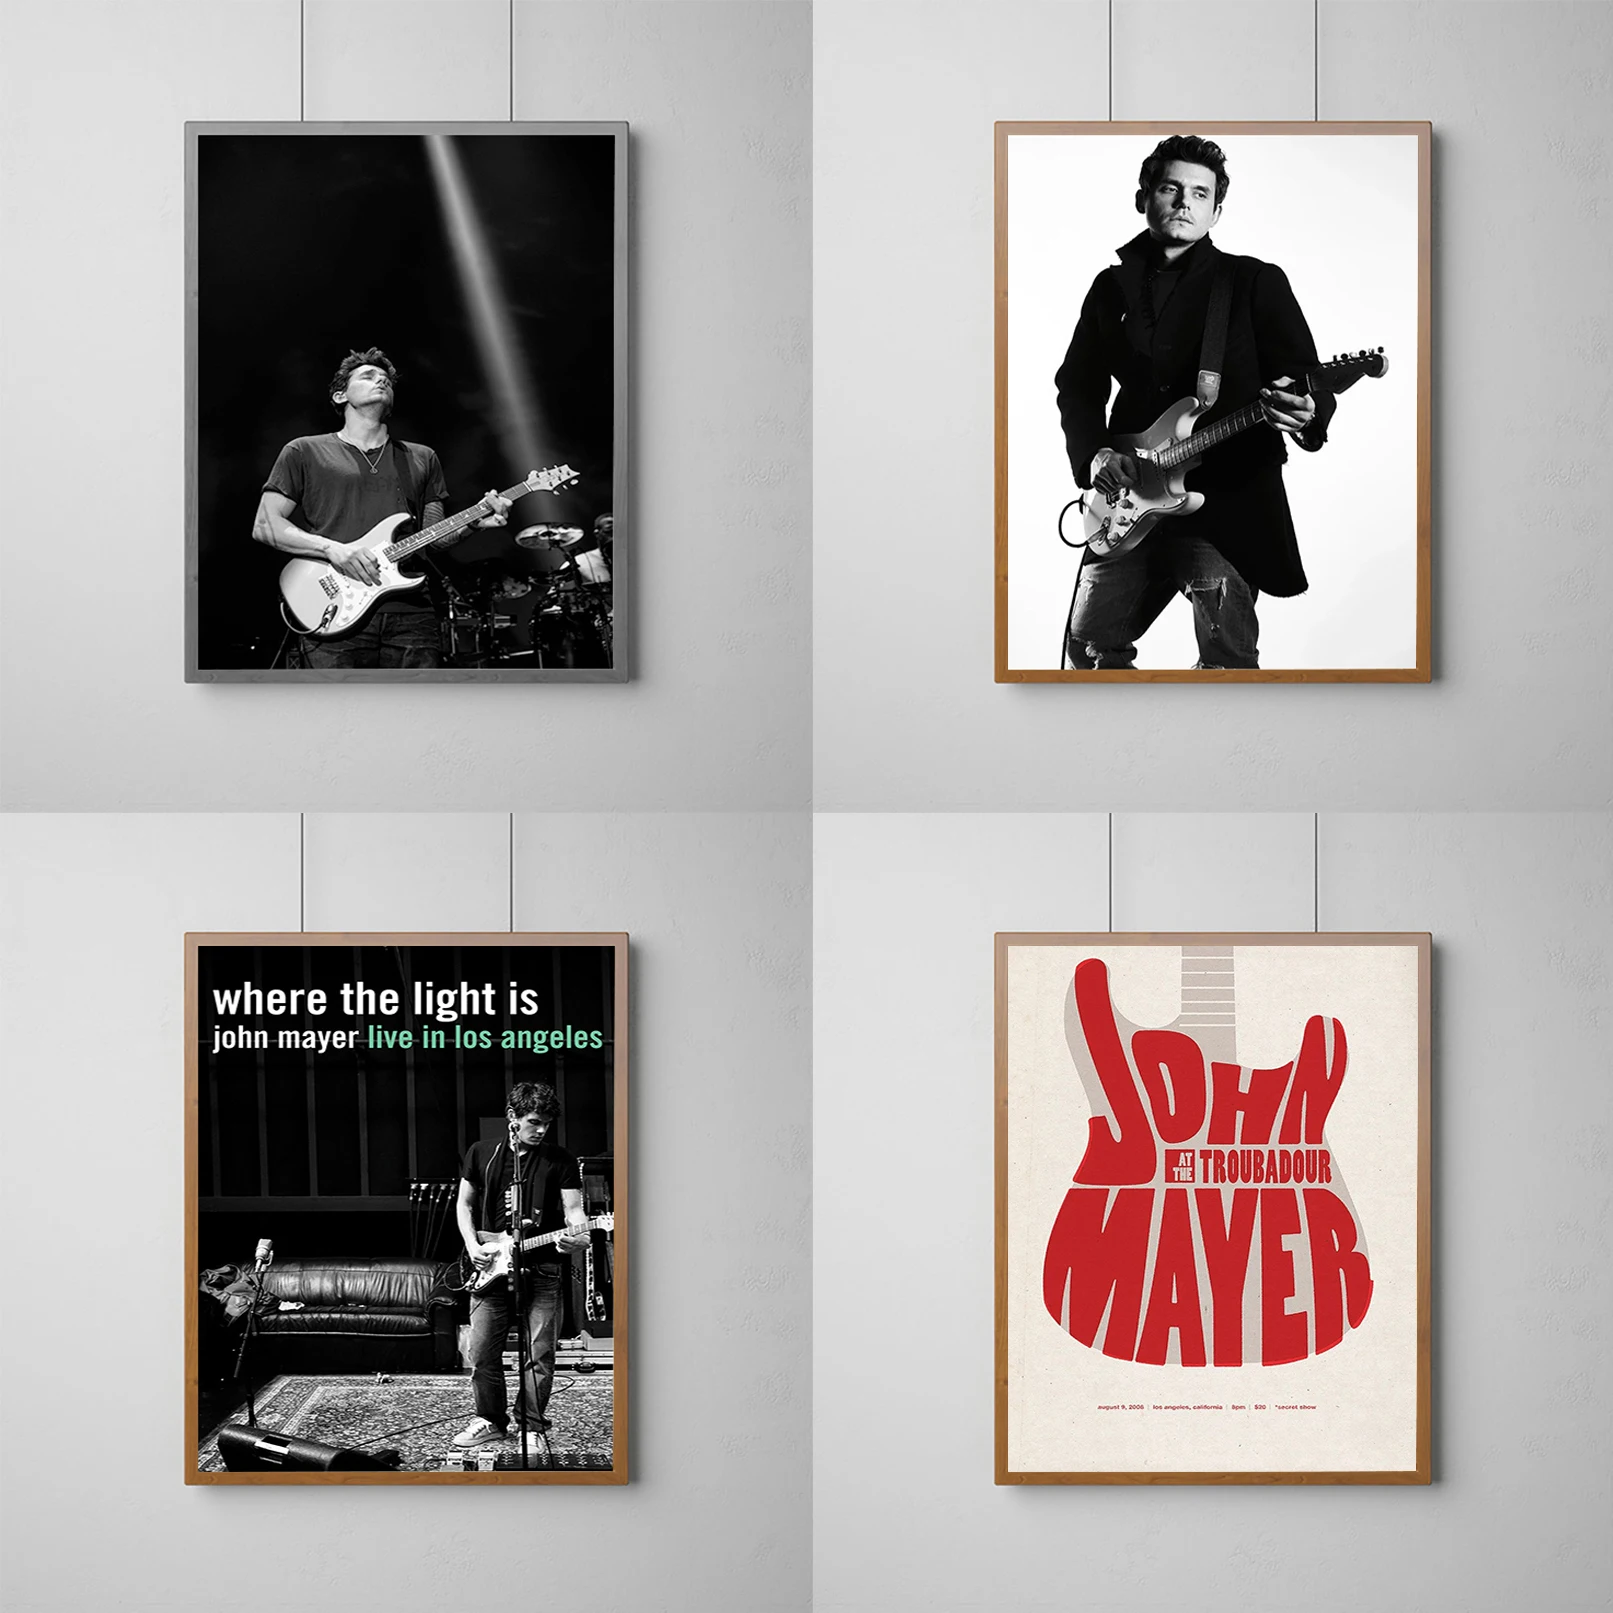 

American Singer John Mayer Poster Posters for Wall Art Canvas Home and Decoration Decorative Painting Room Decor Decorations the